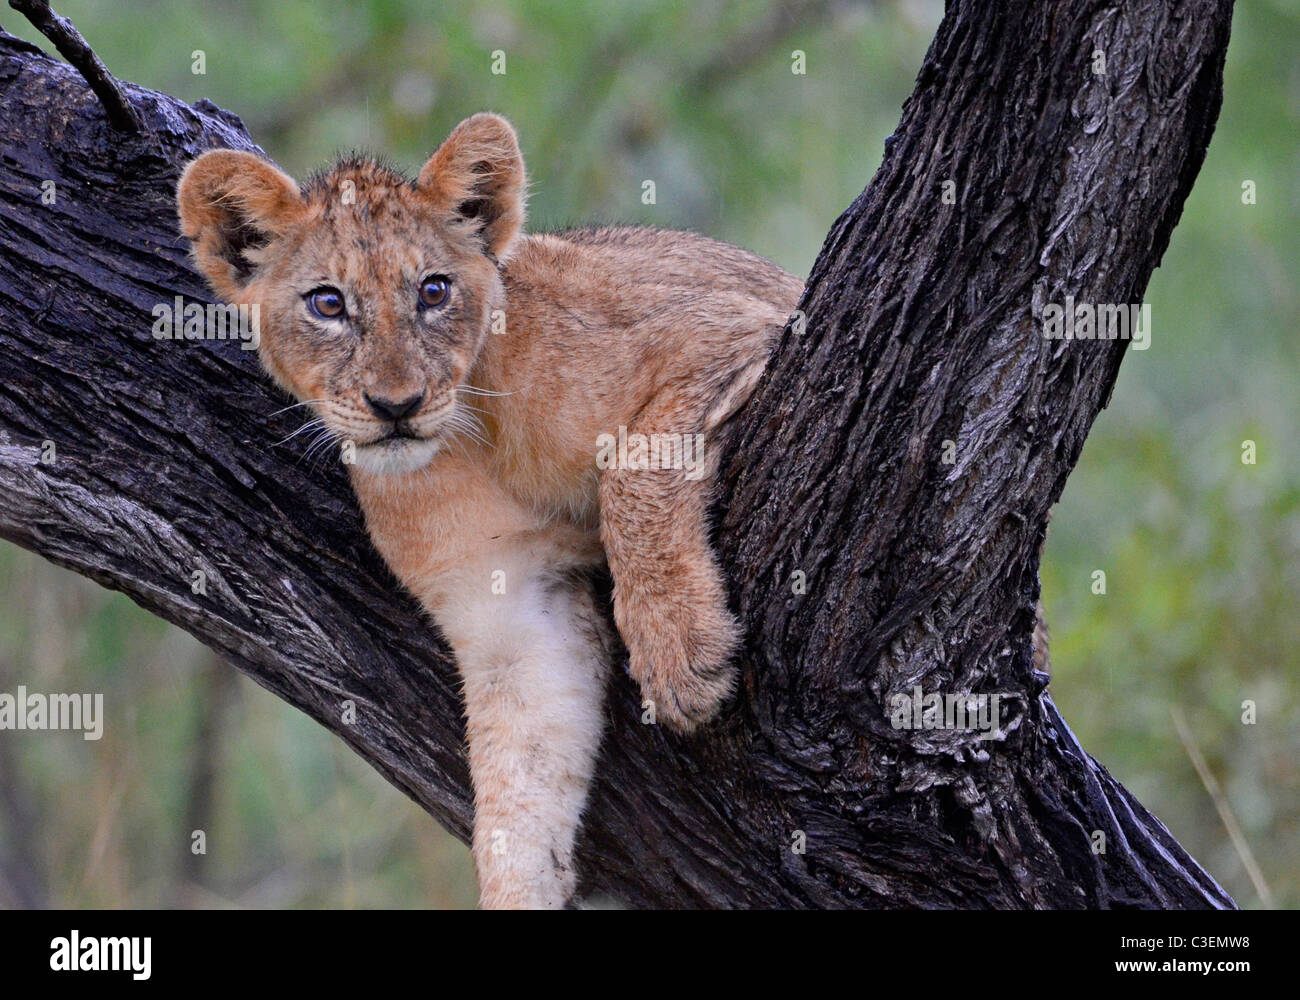 Affordable superb game viewing in the Kruger National Park, South Africa. Happy lion cub lying in fork of tree, Pretoriuskop. Stock Photo